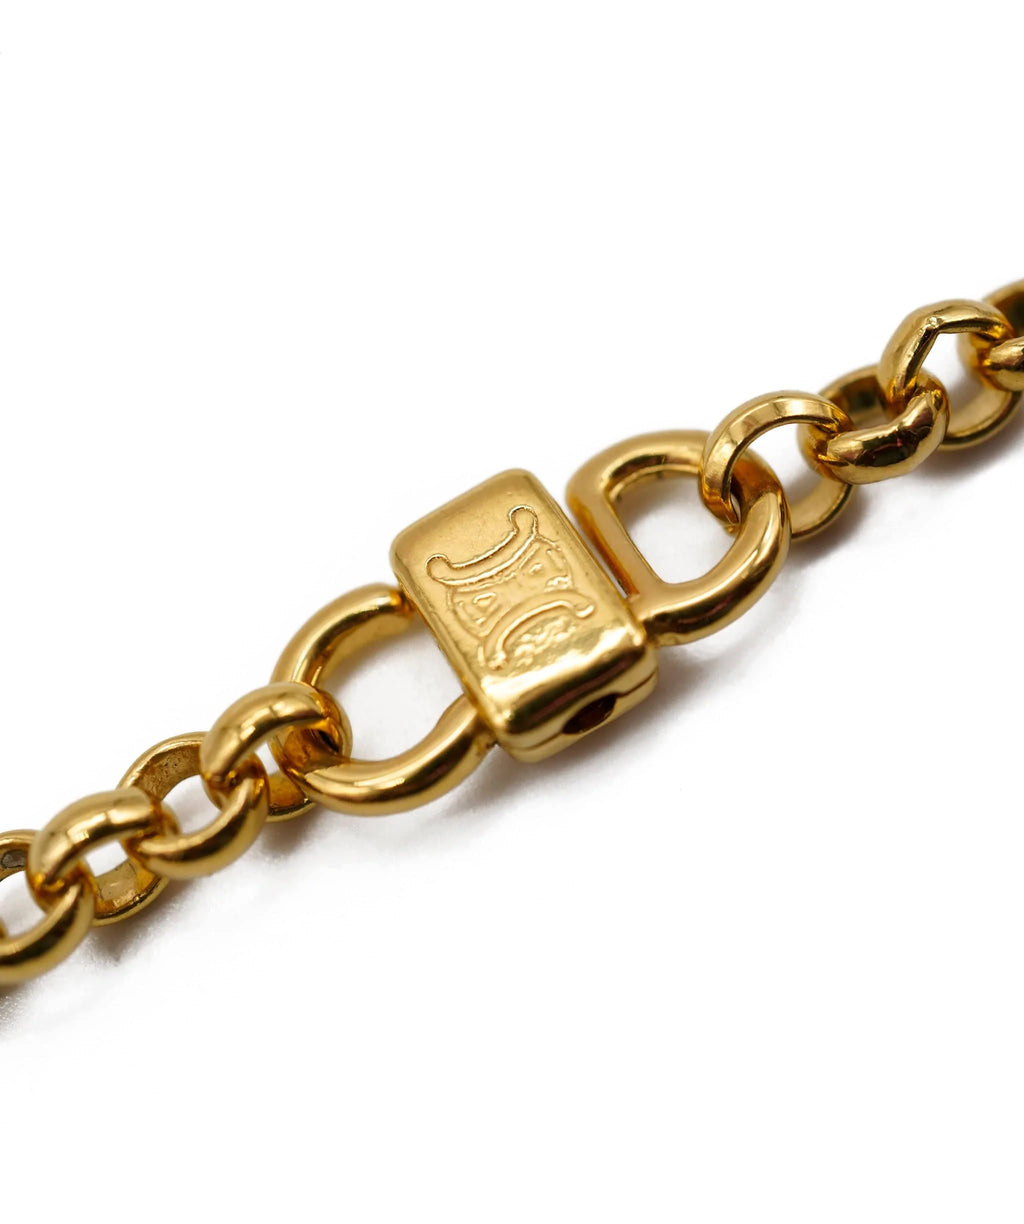 Maillon triomphe yellow gold necklace Celine Gold in Yellow gold - 41676907